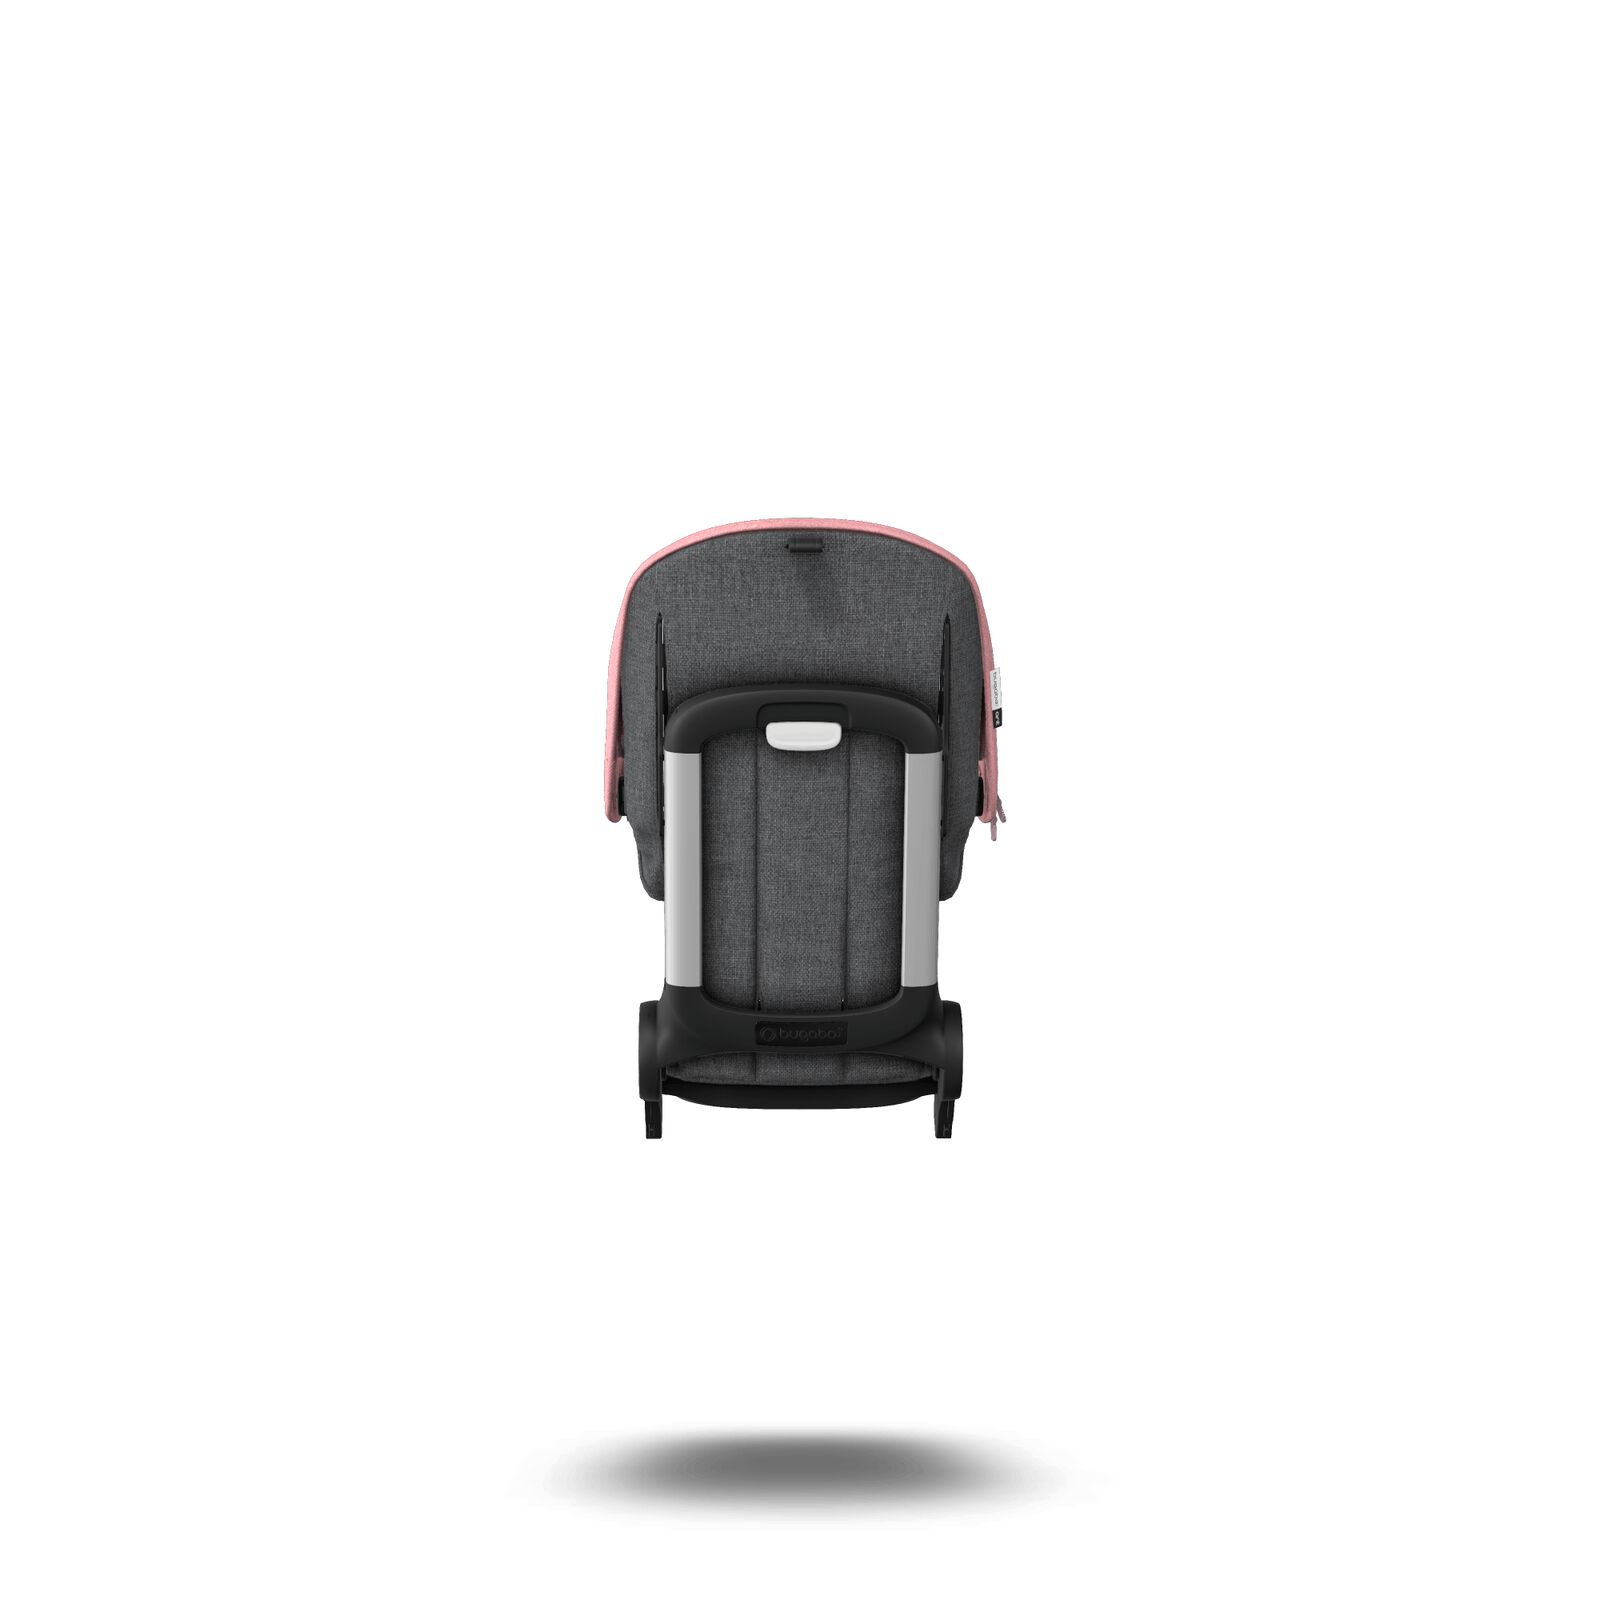 Style set complet Bugaboo Ant